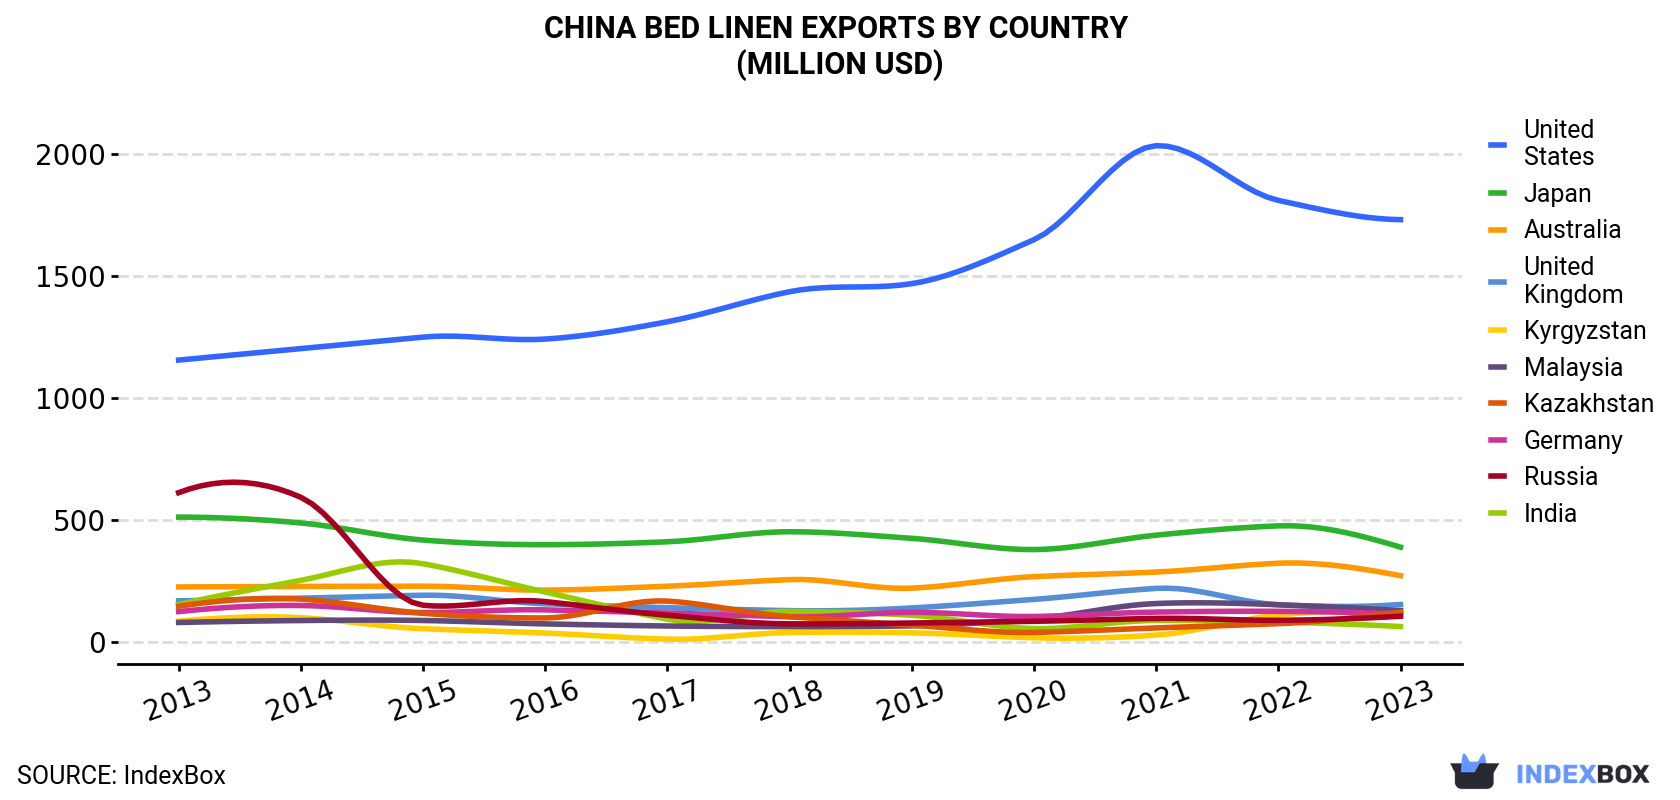 China Bed Linen Exports By Country (Million USD)